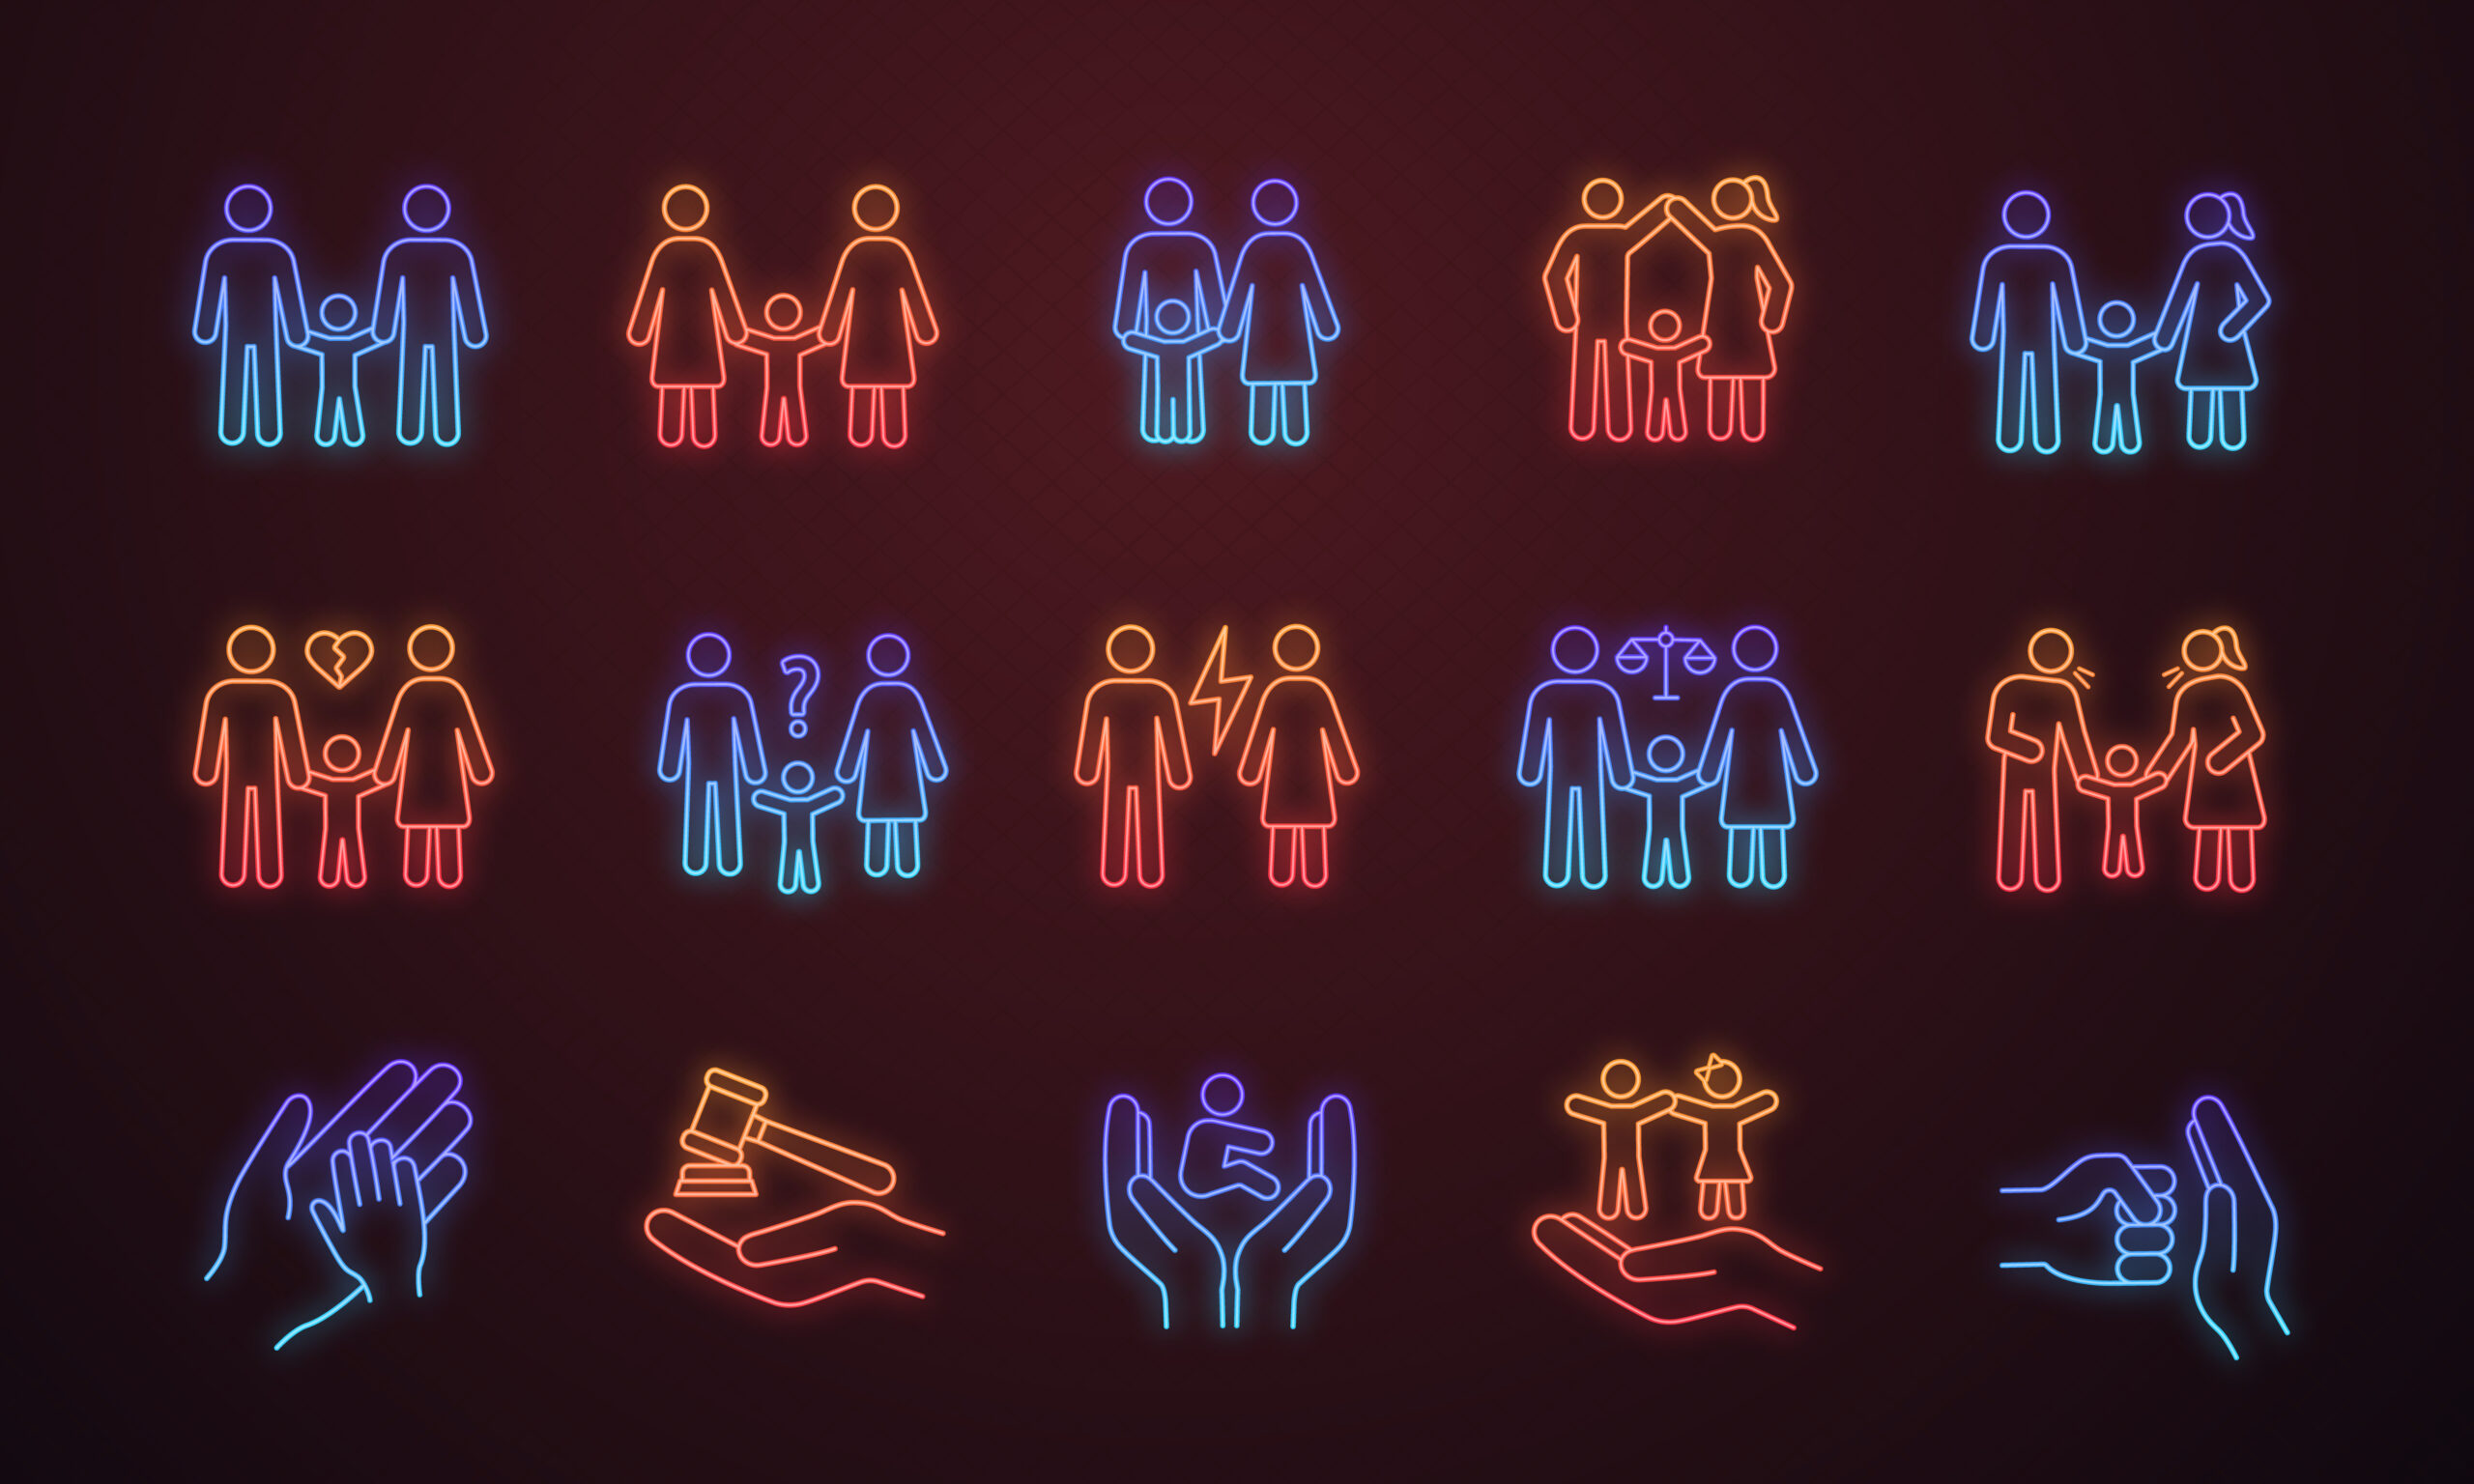 Child custody neon light icons set. LGBT families. Adoption and orphanage. Family court. Children’s rights. Glowing signs. Vector isolated illustrations